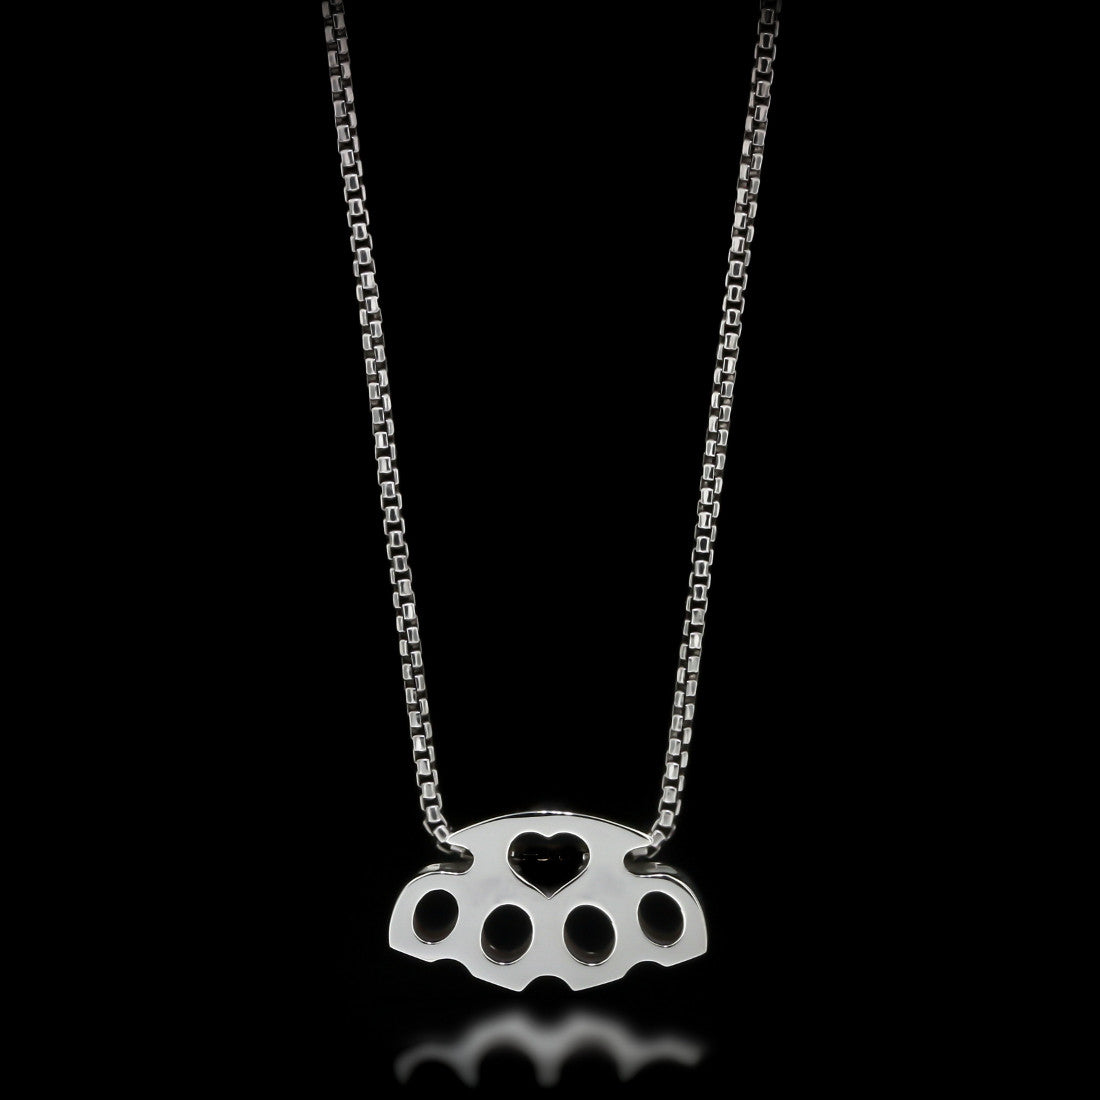 Brass Knuckle Slider Necklace - Sterling Silver - Twisted Love NYC